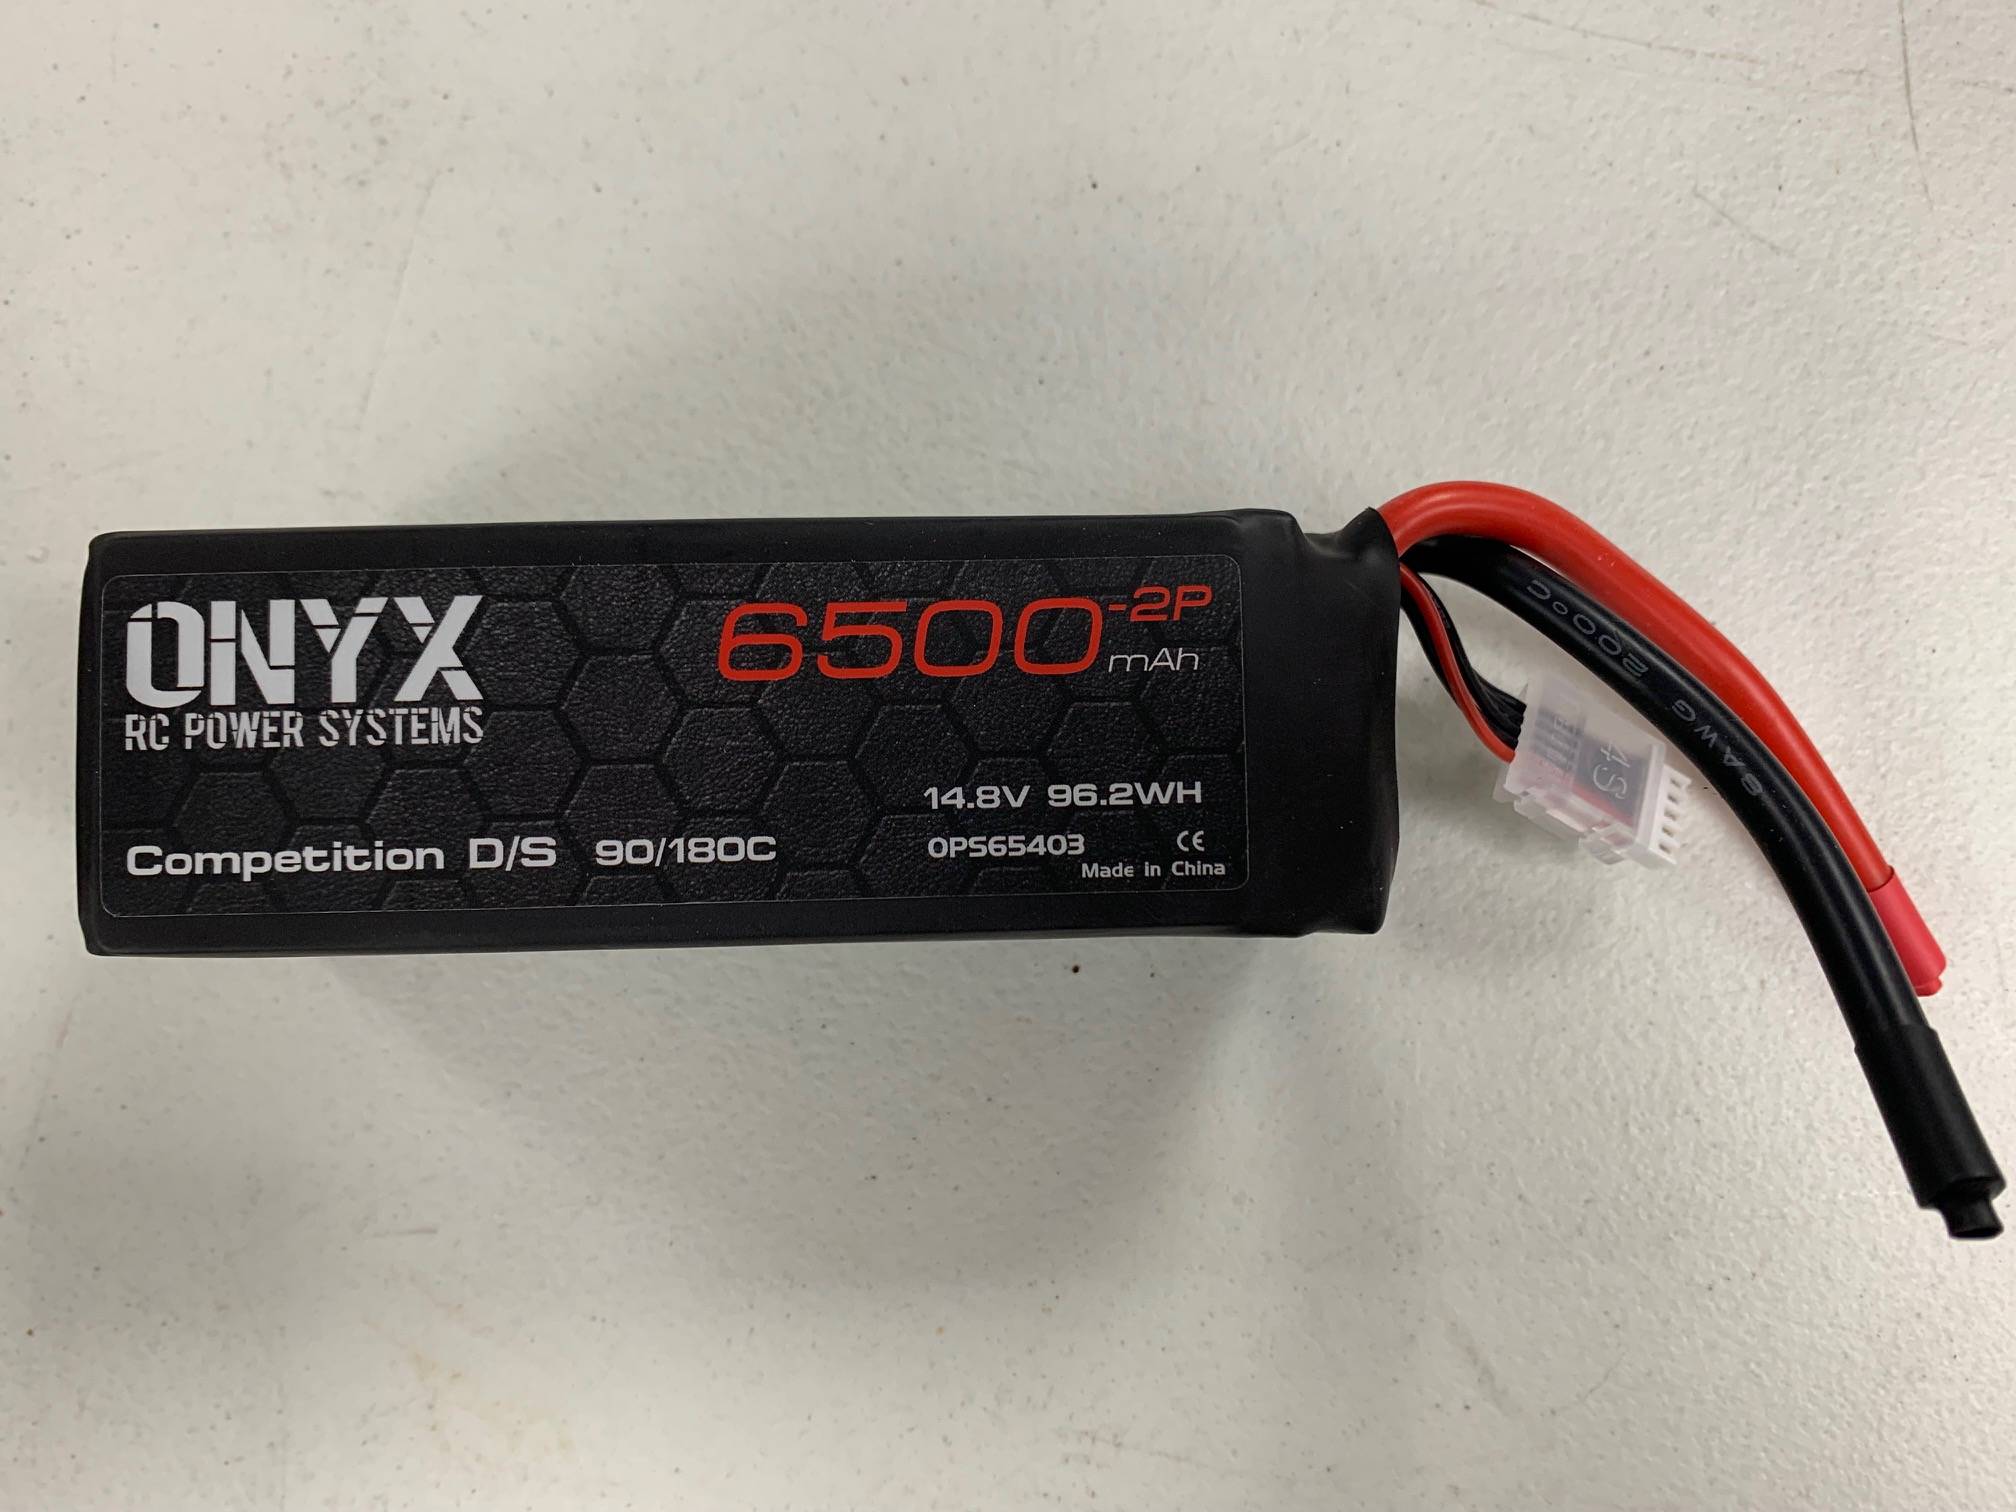 Buy ONYX  battery's from our new site www.onyxrcpowersystemsusa.com